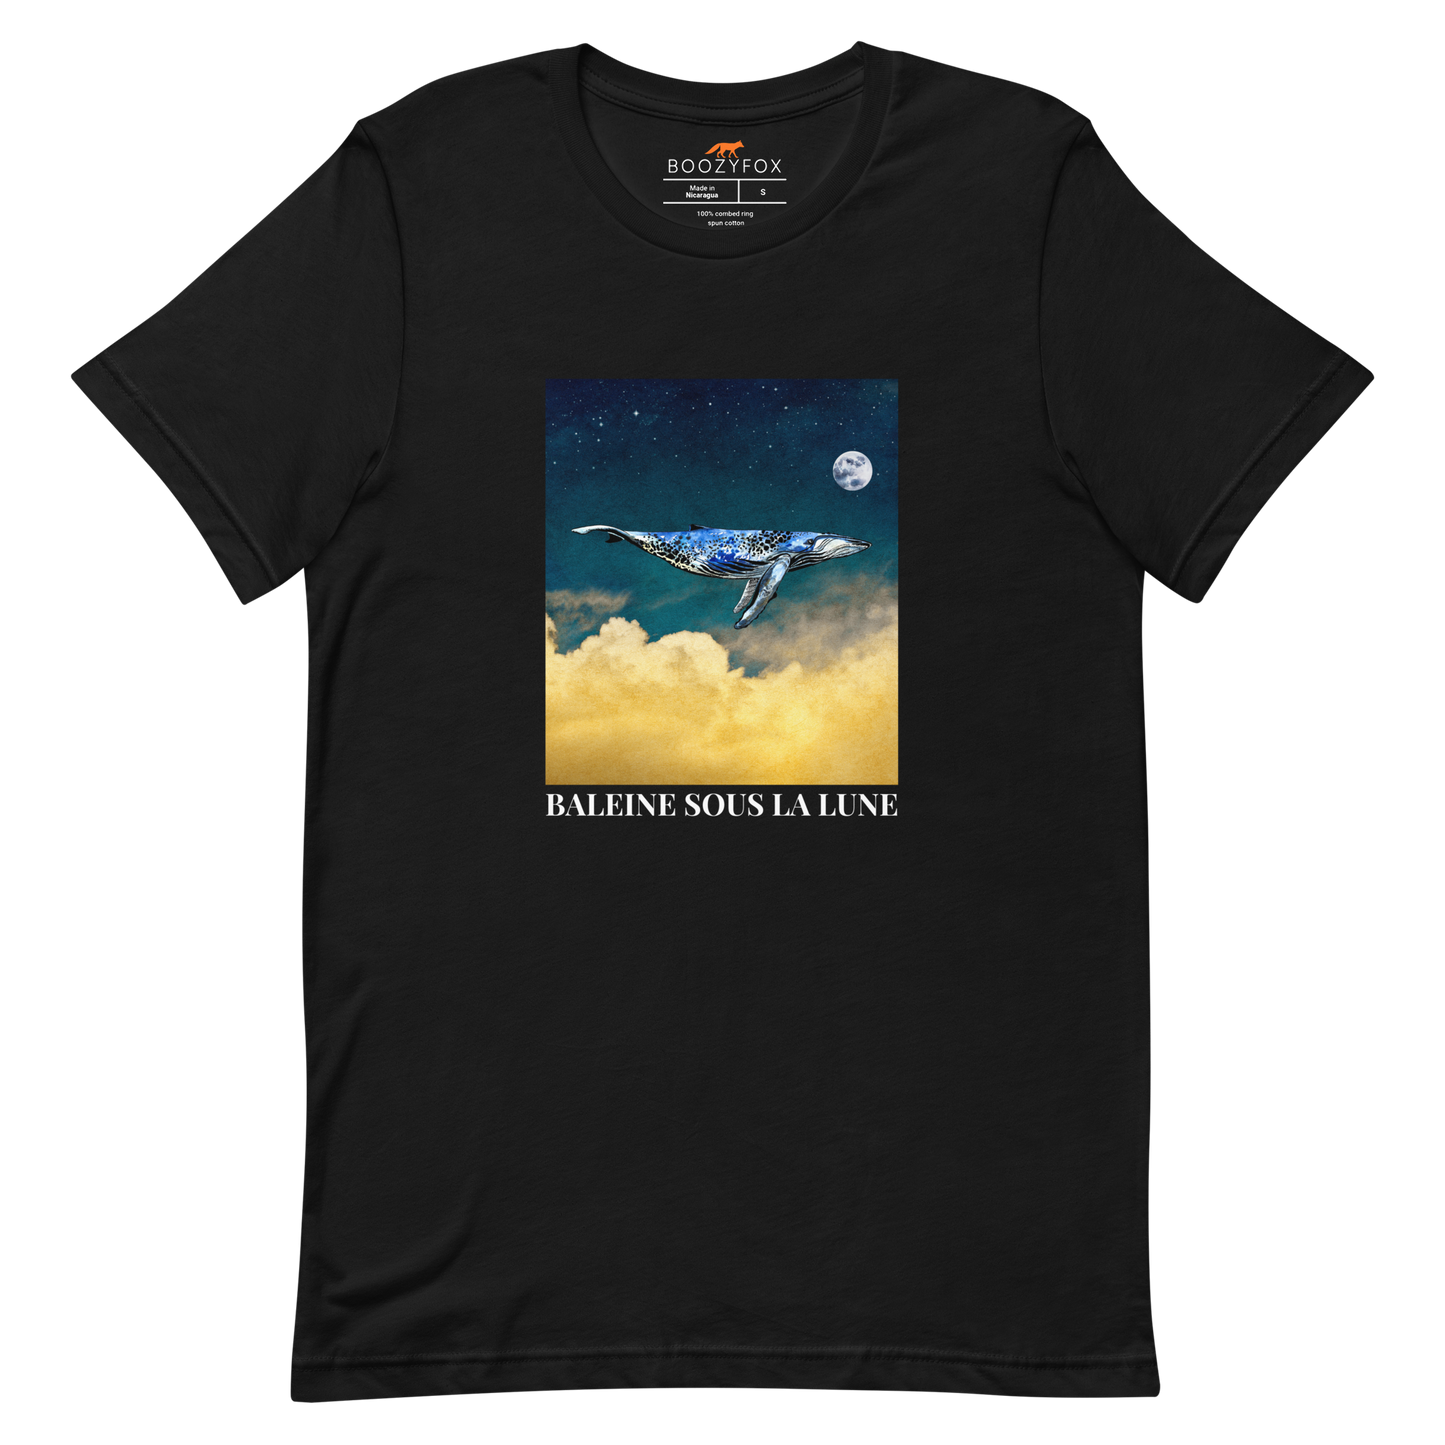 Black Premium Whale T-Shirt featuring a majestic Whale Under The Moon graphic on the chest - Cool Graphic Whale Tees - Boozy Fox